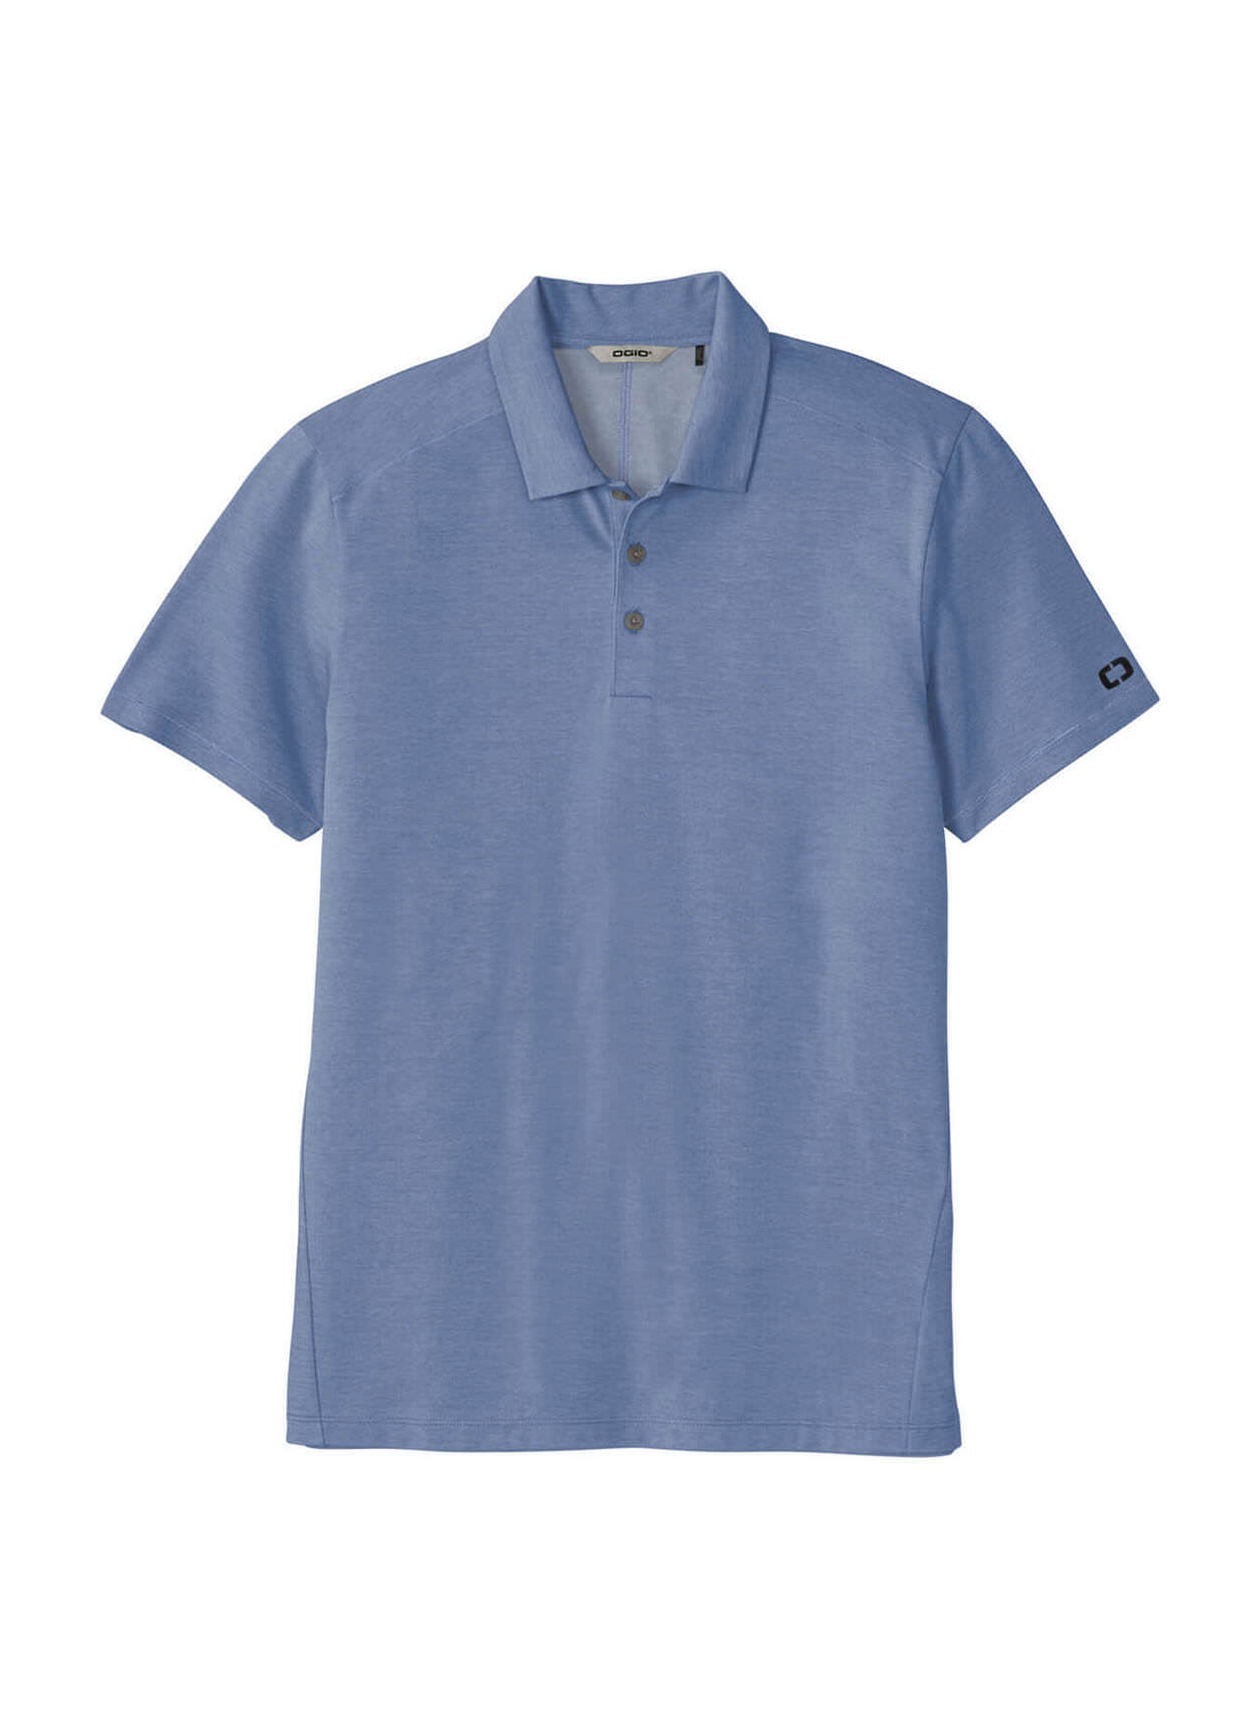 OGIO Men's Force Blue Heather Code Stretch Polo